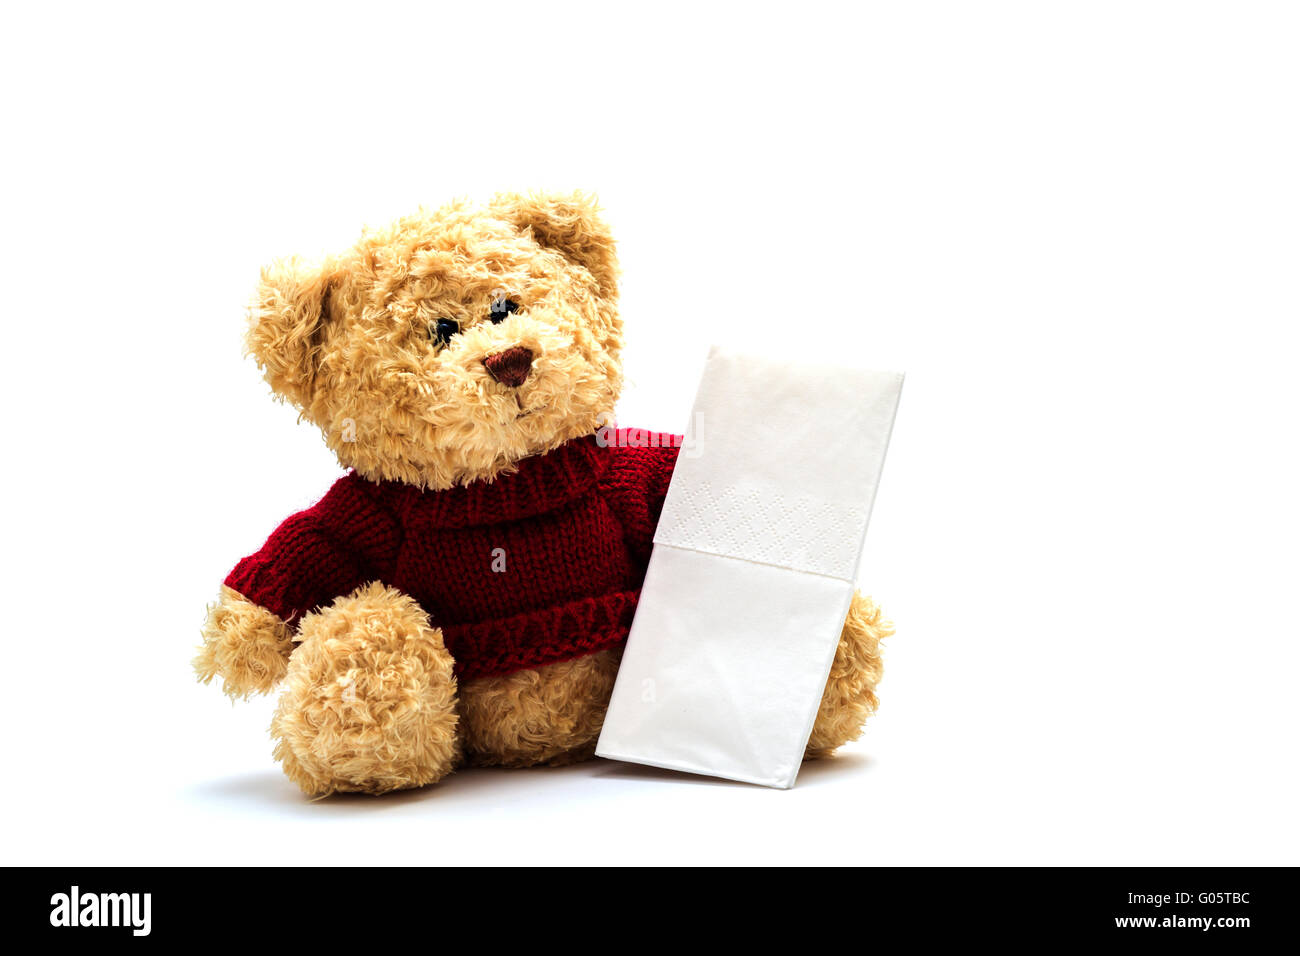 Teddy with tissue Stock Photo